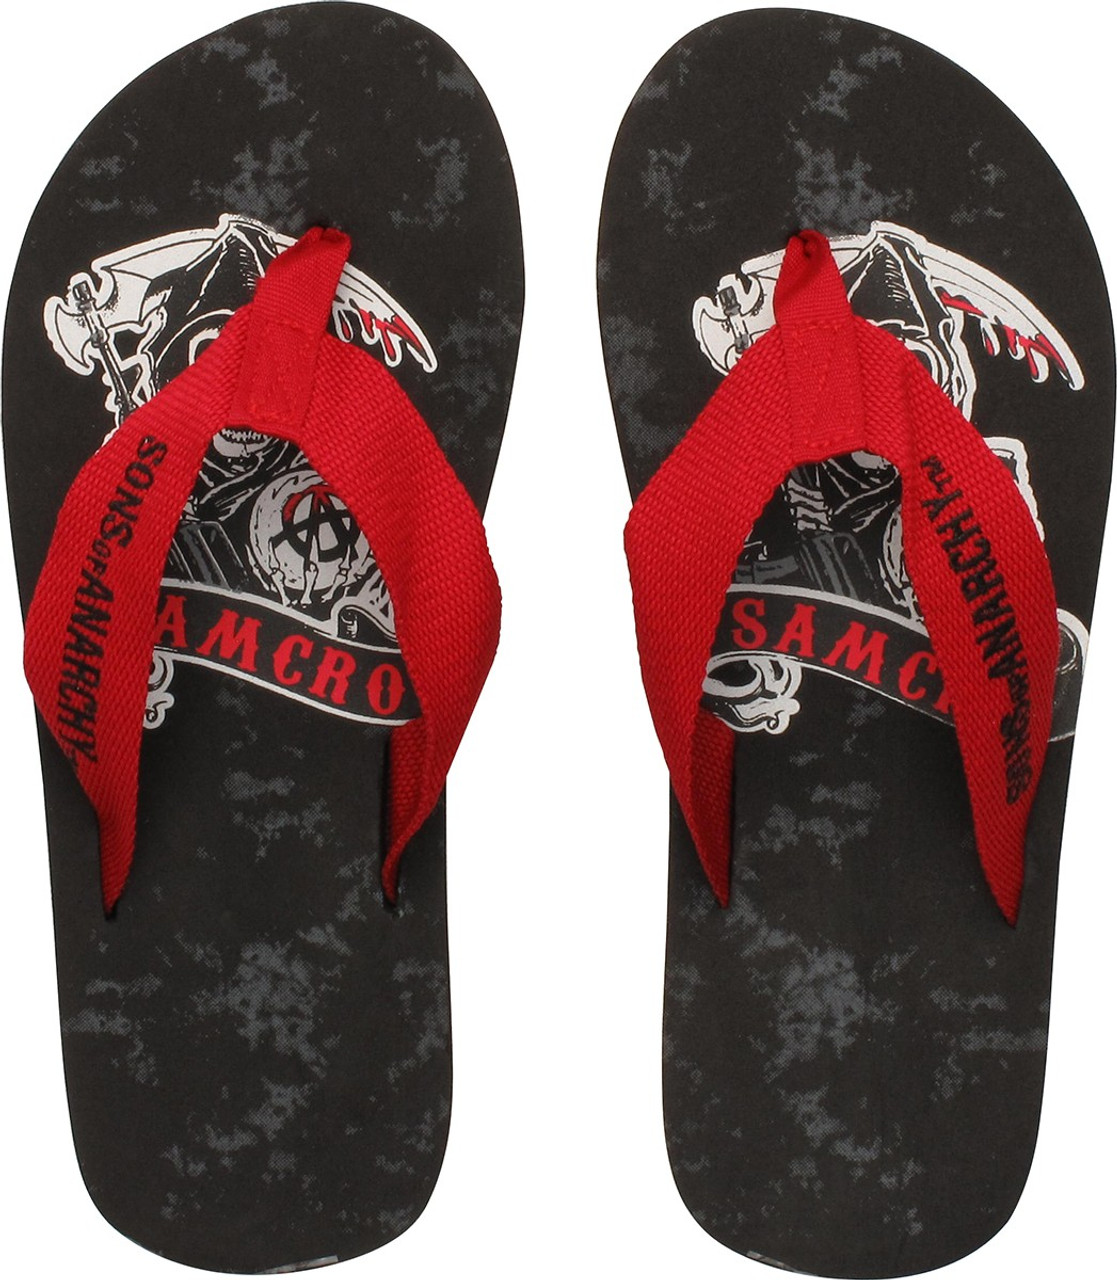 sons of anarchy slippers